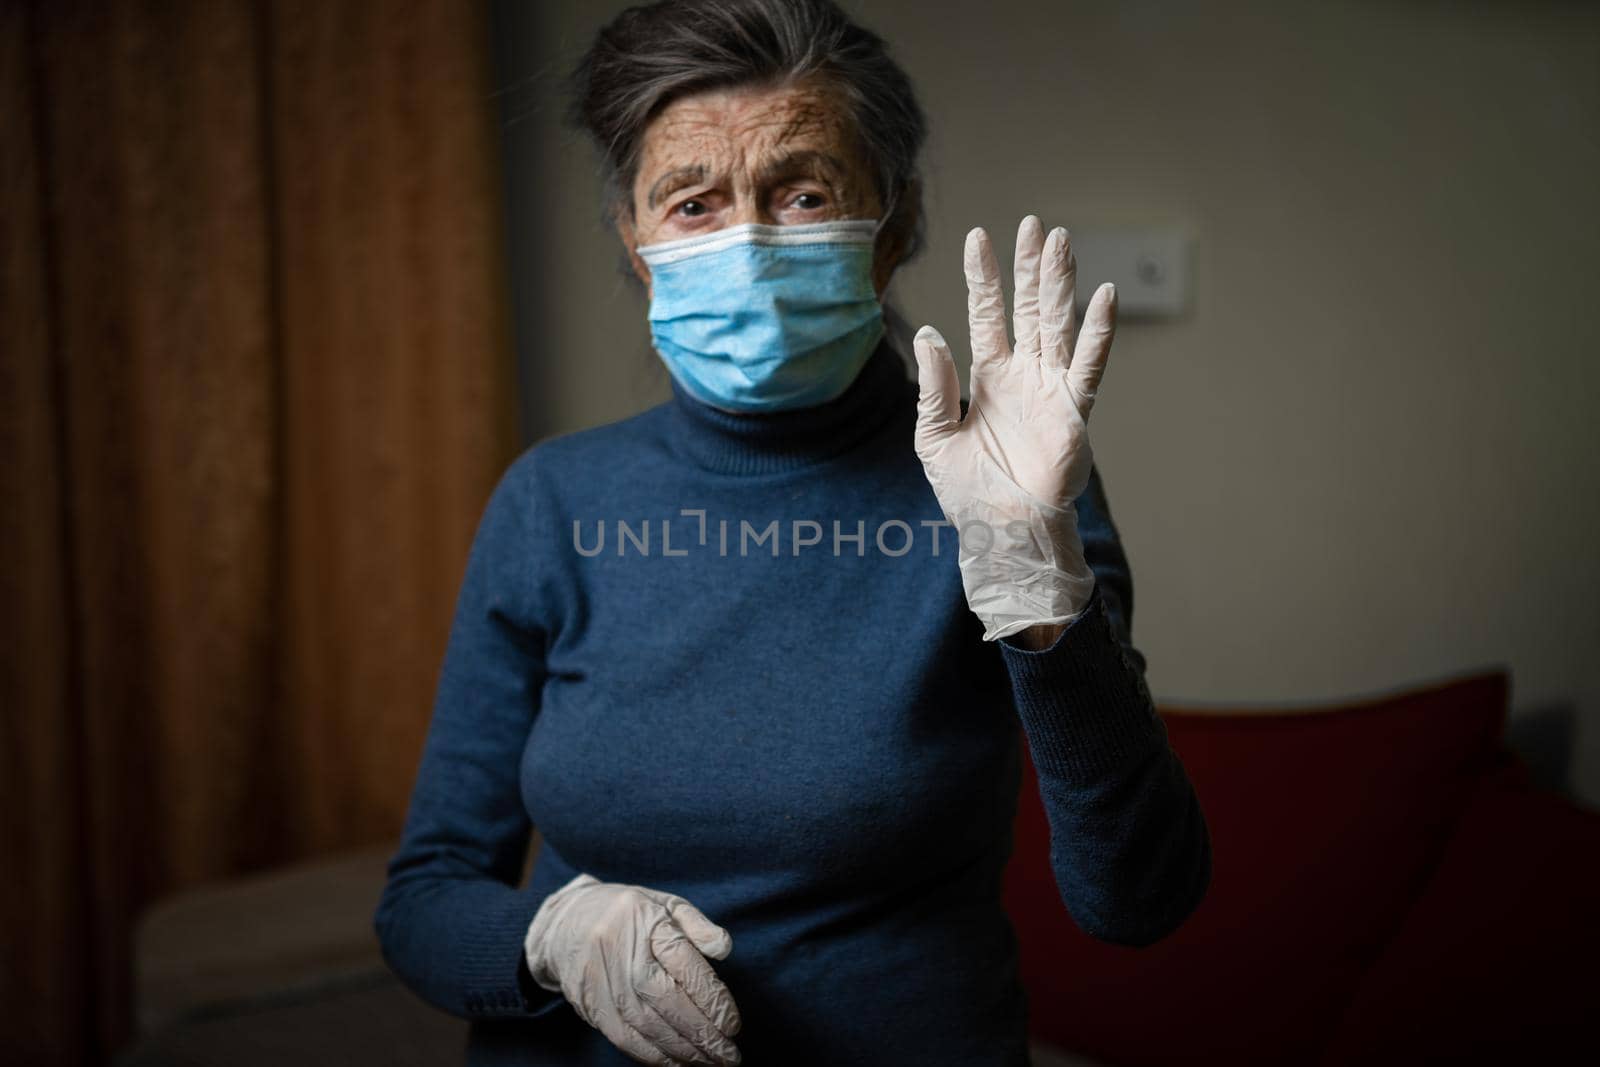 White medical glove in foreground, shown by an elderly grandmother wearing a medical mask, calling for safety and sanitation during an epidemic. Senior woman in personal protective equipment.